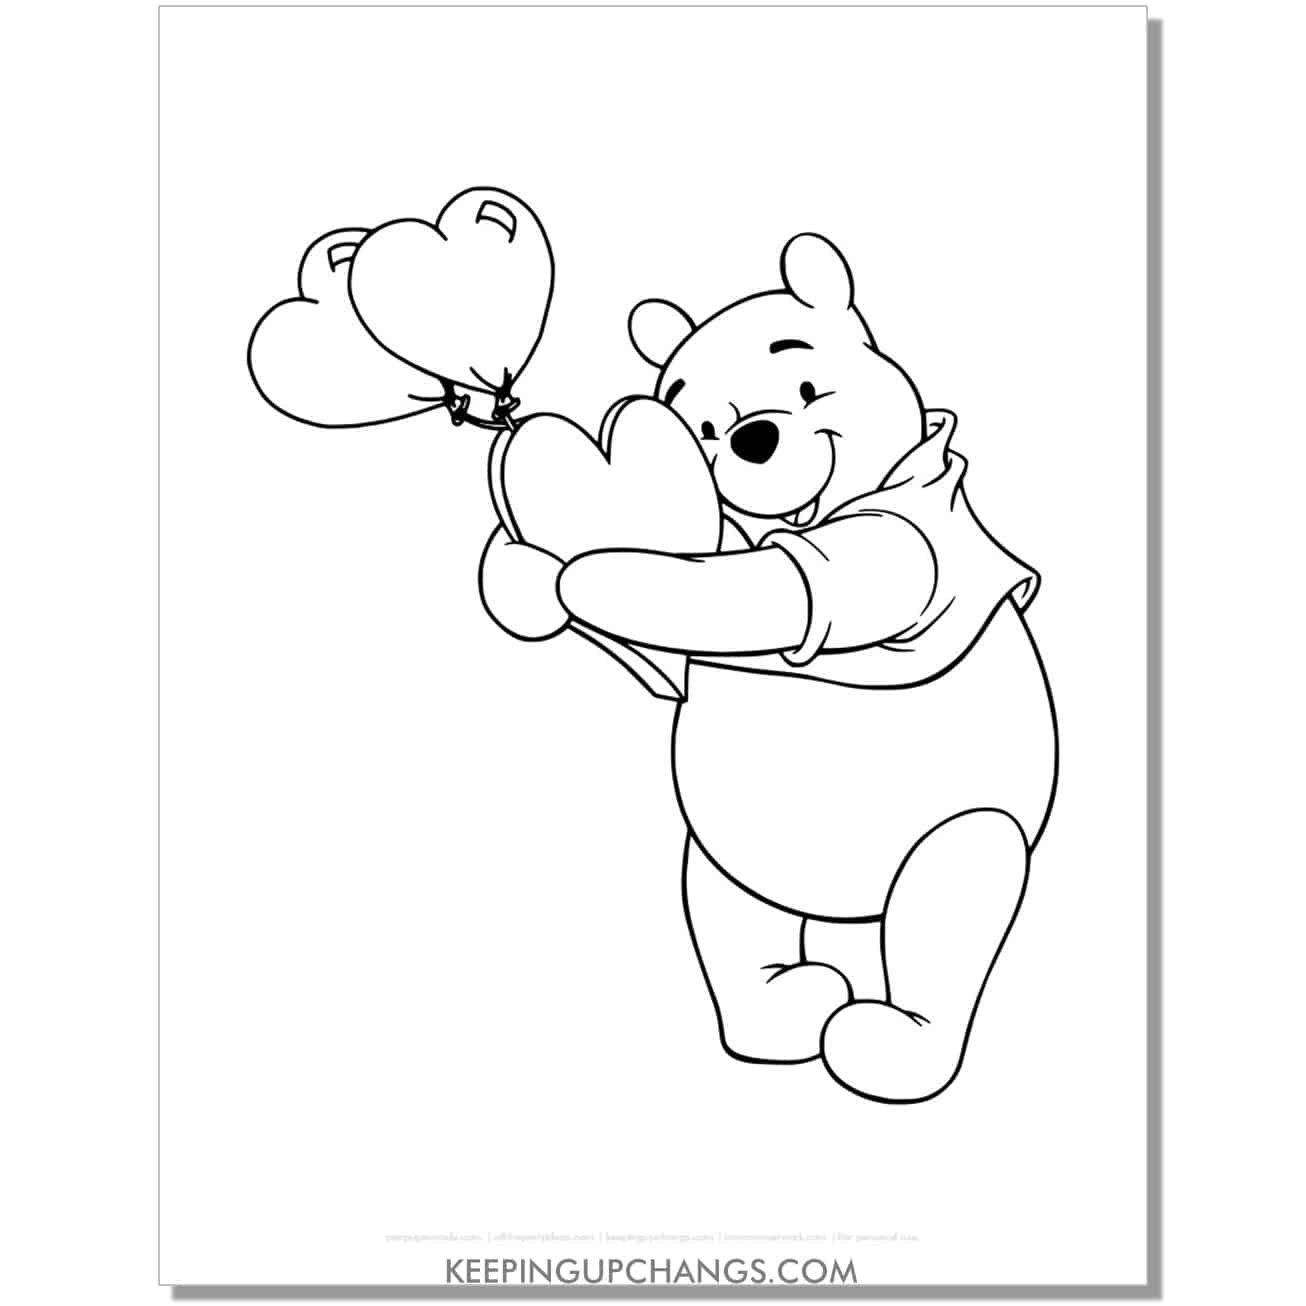 winnie the pooh holding heart balloons coloring page, sheet.